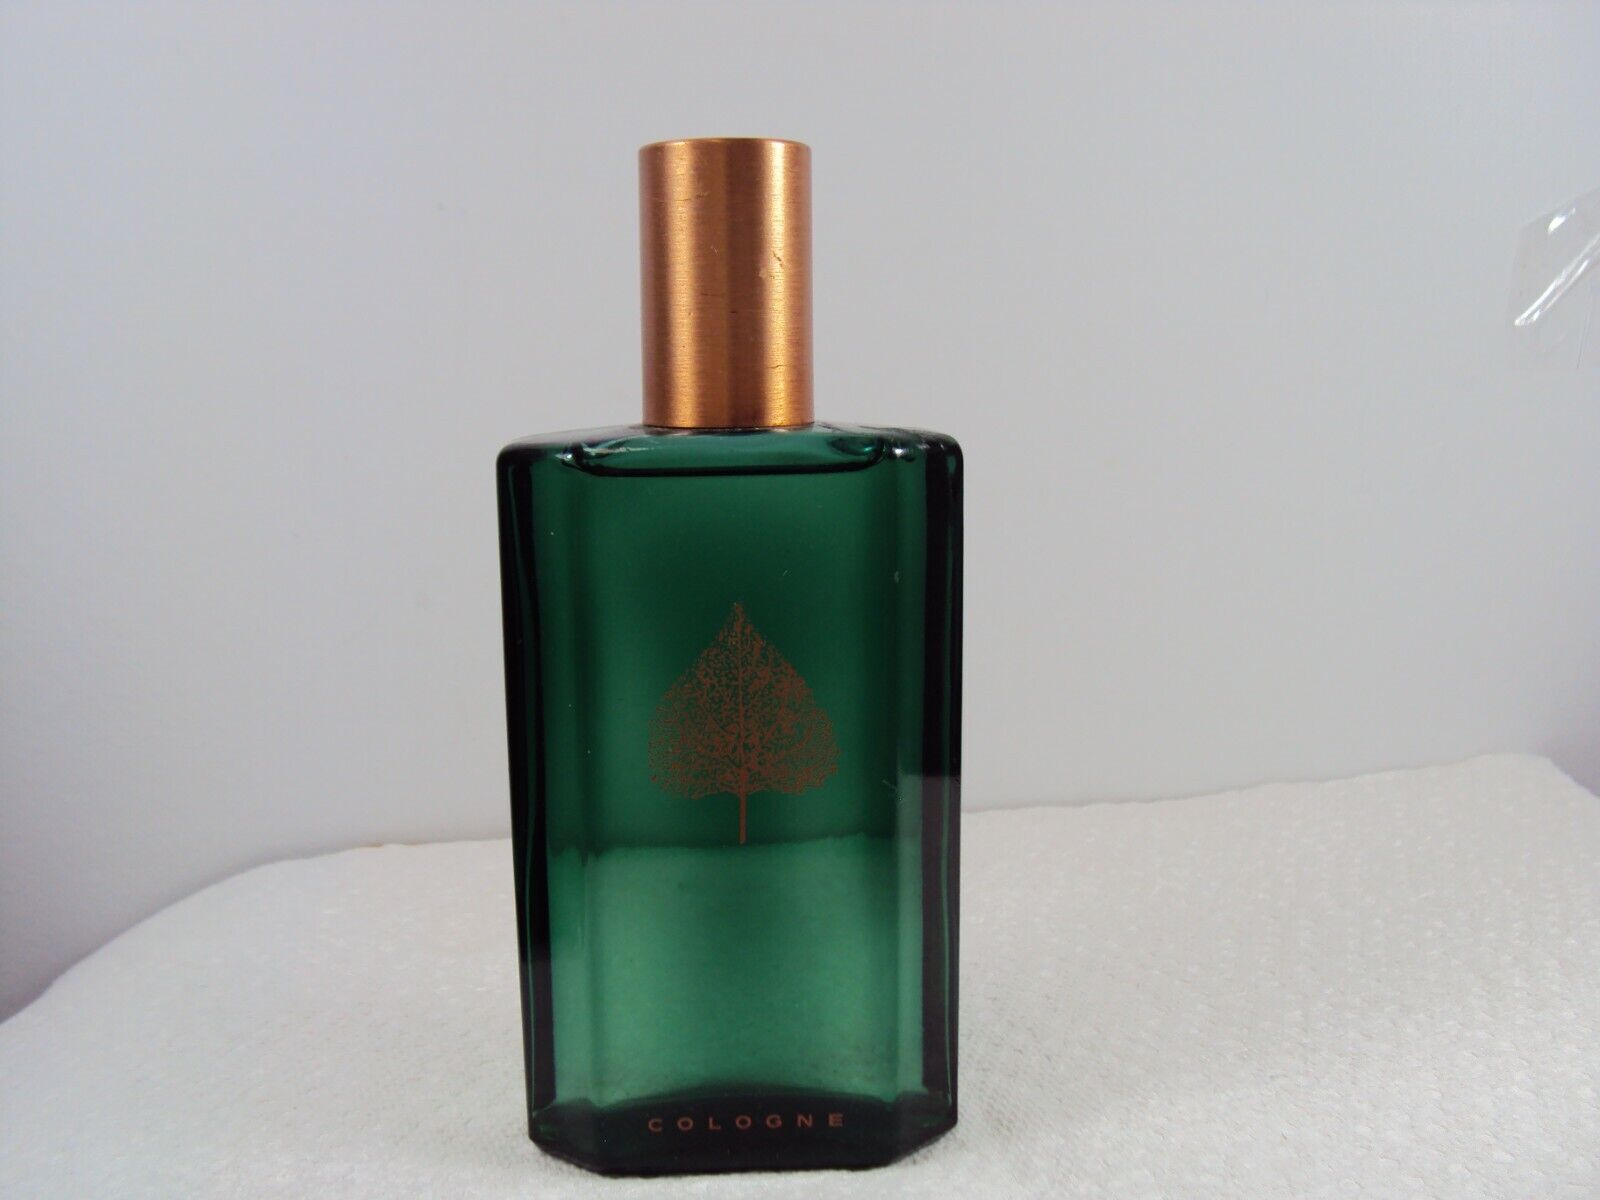 Aspen Cologne by Coty for Men 118ml at Ratans Online Shop - Perfumes Wholesale and Retailer Fragrance